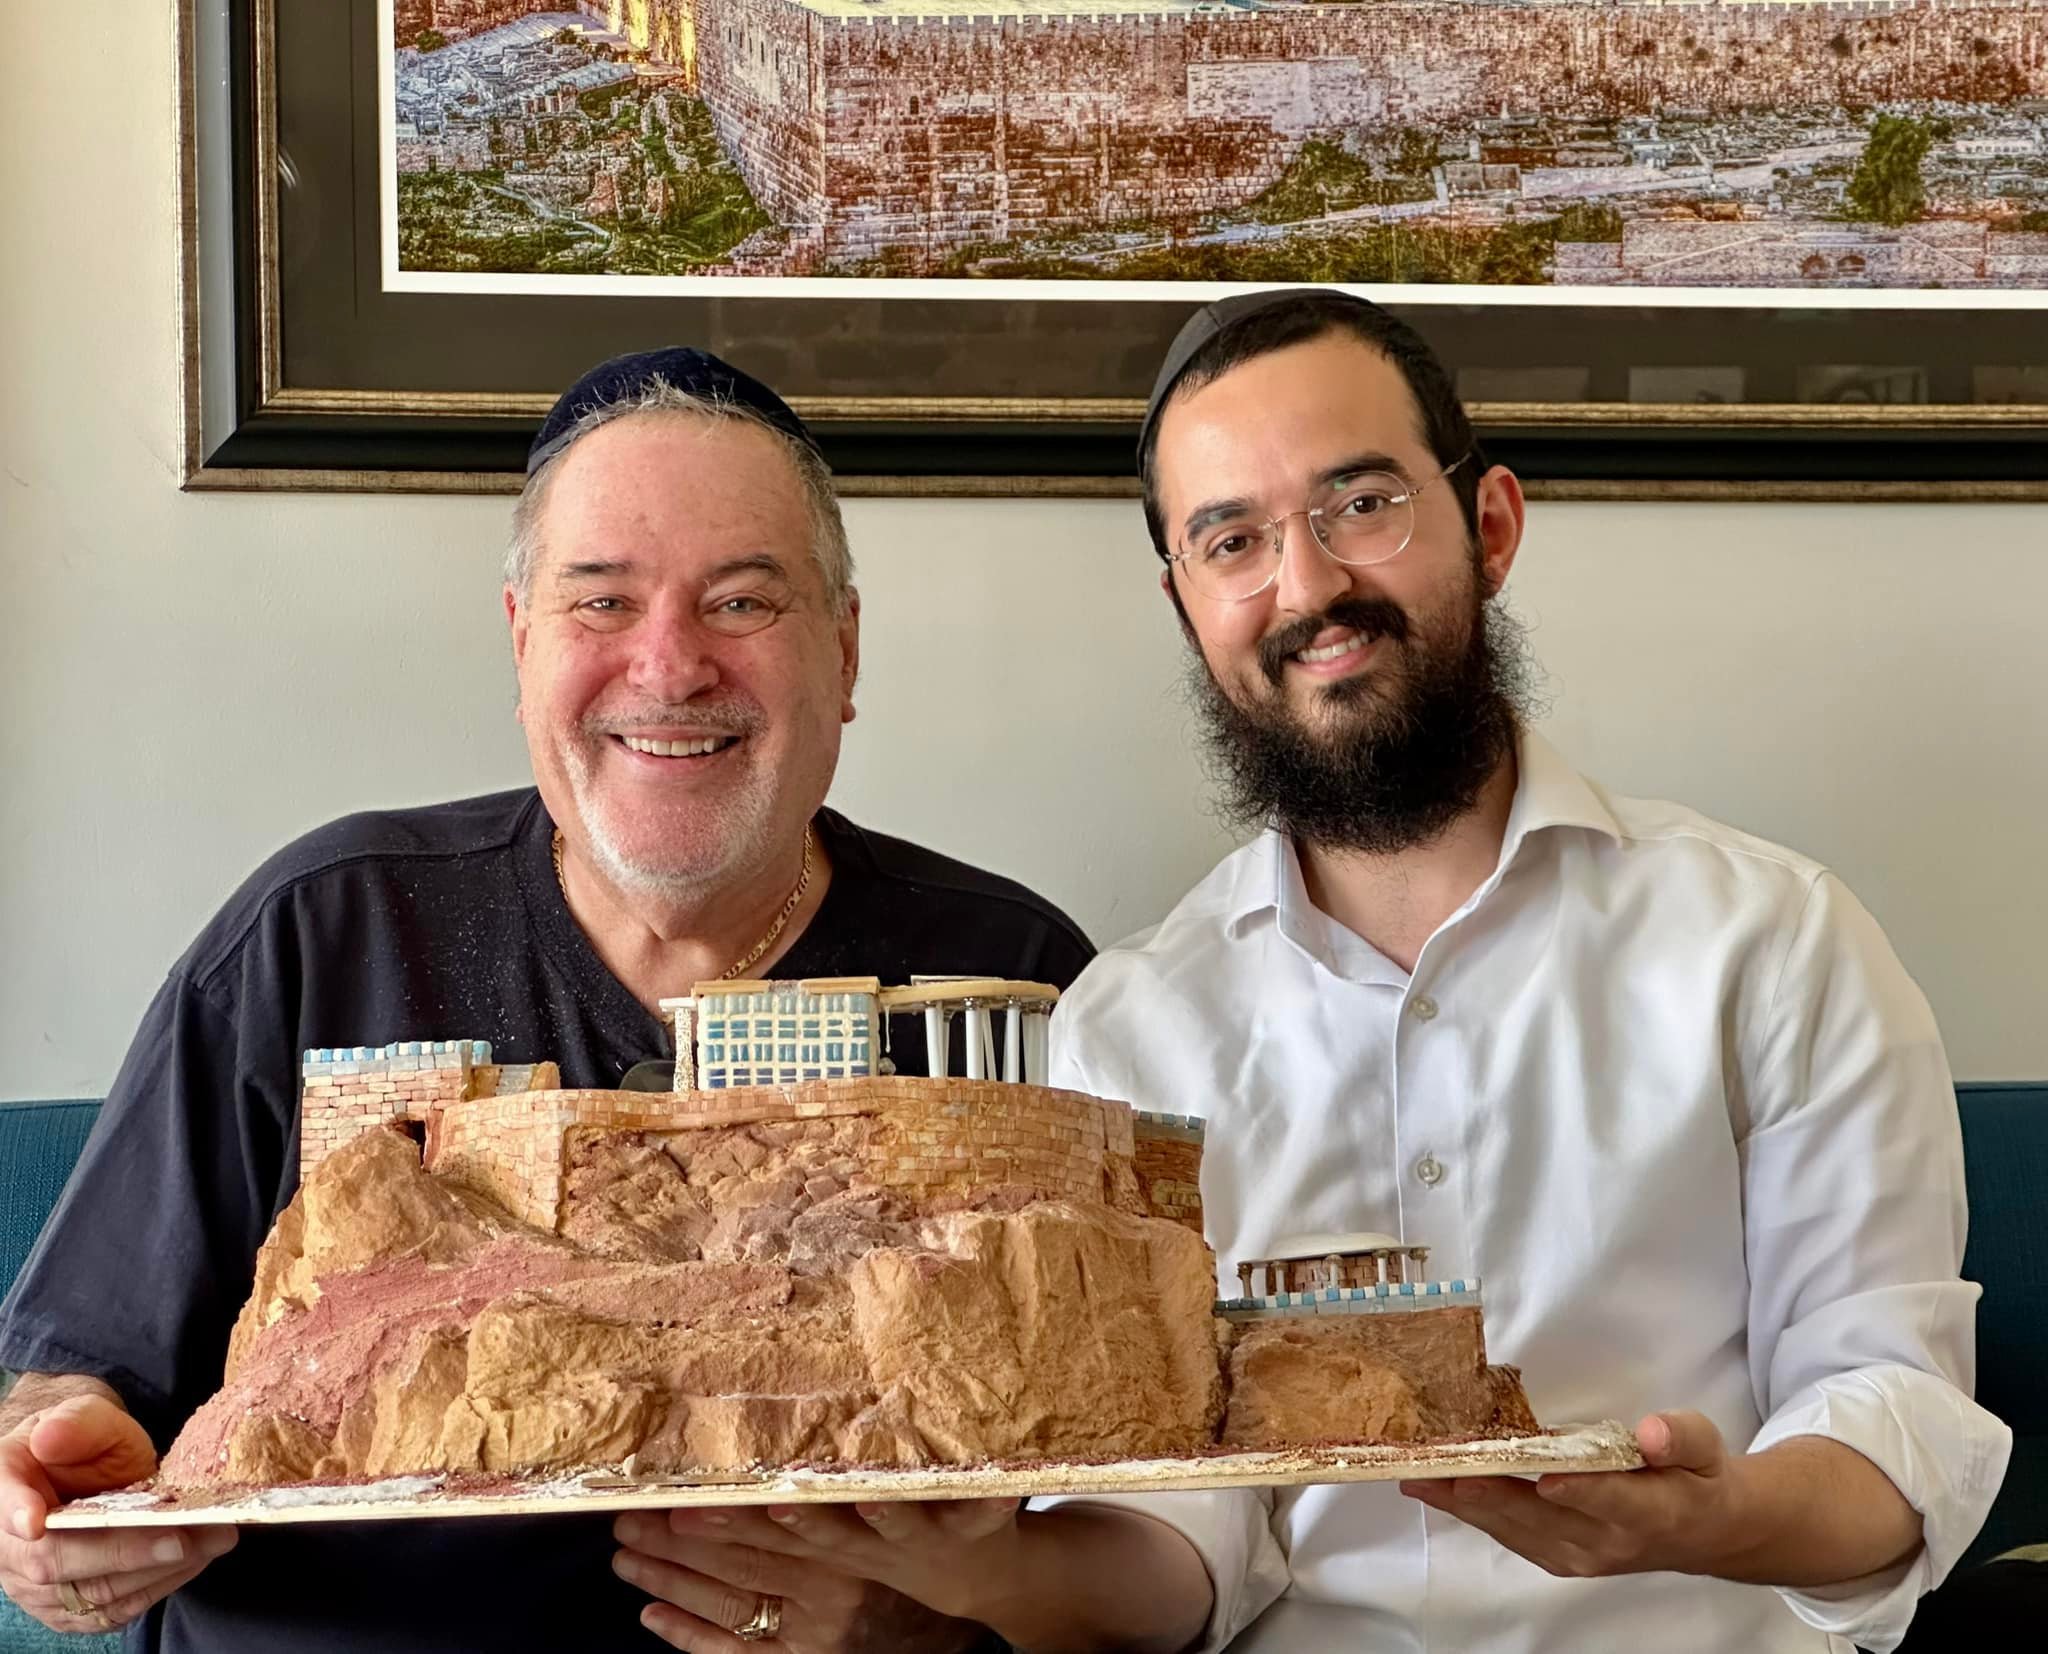 Thank you Joel Beck &amp; Jacki Beck for the most amazing gift to the Pensacola Chabad Jewish Center!
This is a handmade model of the fortress of Masada in Israel. Made with such detail and precision, it is an absolute masterpiece. 

Masada is an anc